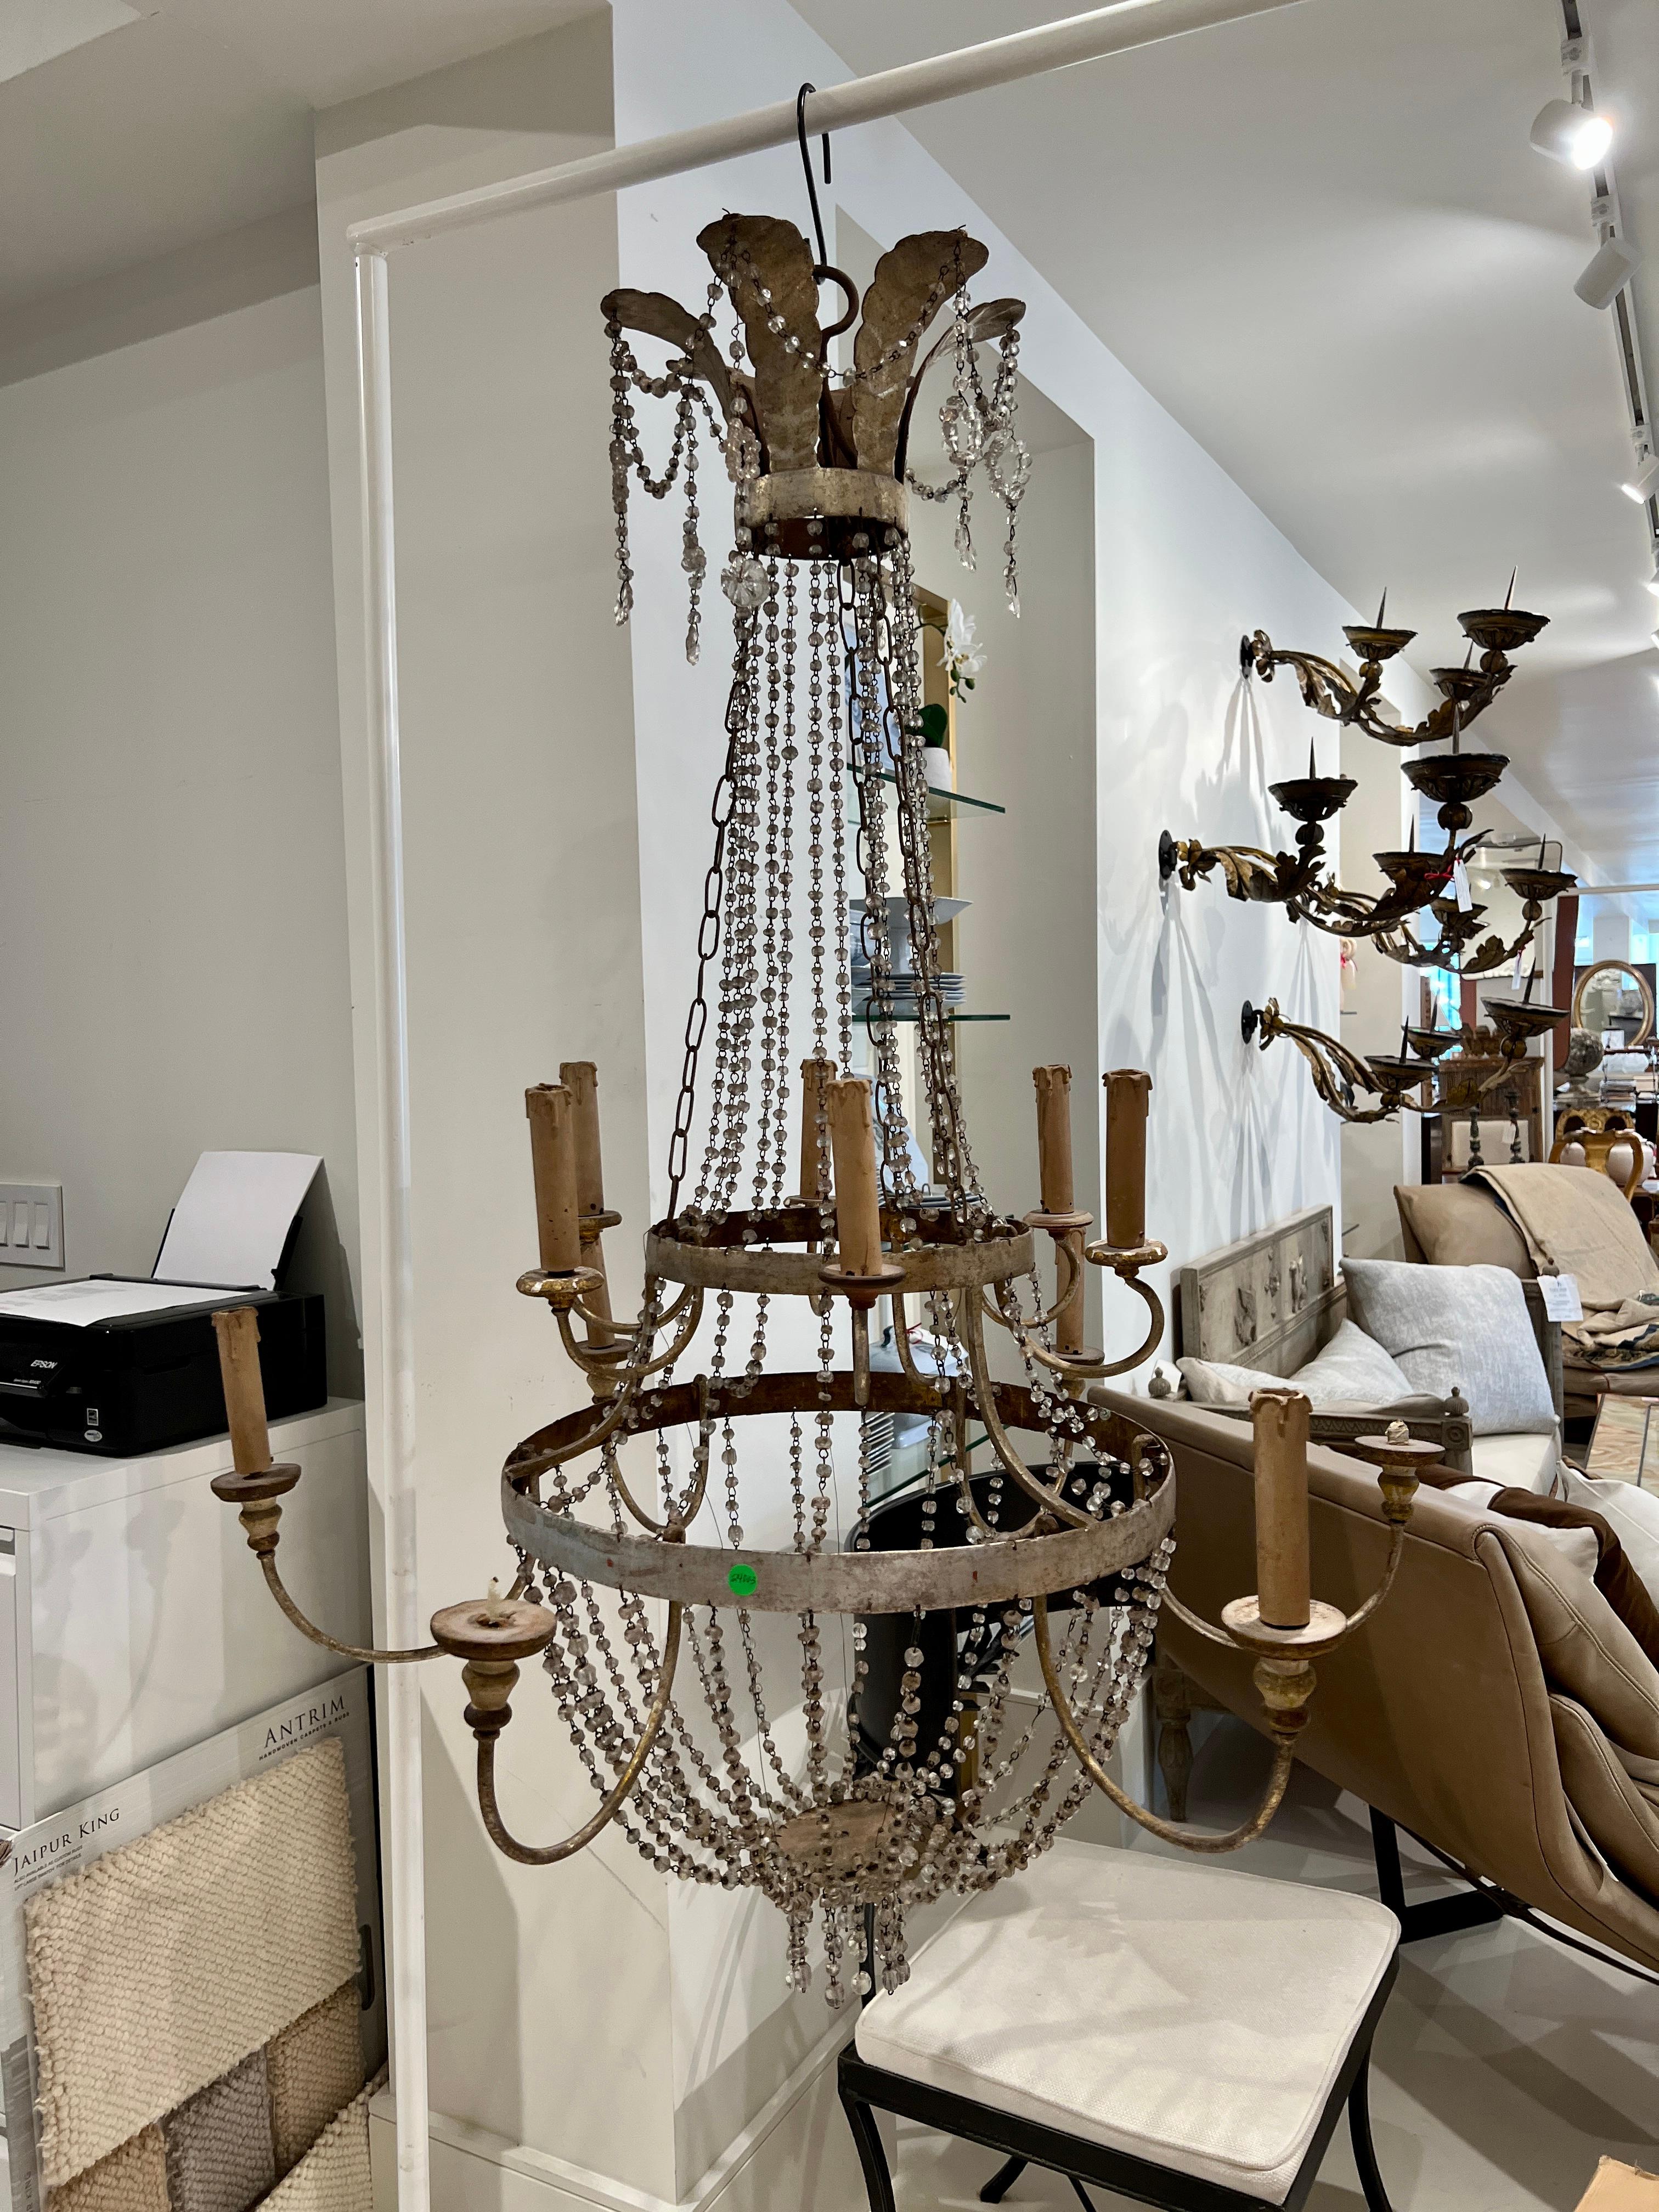 Impressive in scale and style, this Empire chandelier is crowned with acanthus leaves dangling crystal drops. The two silver banded tiers support the 12 arms with the crystal beaded basket dripping with more crystals at the bottom. An elegant